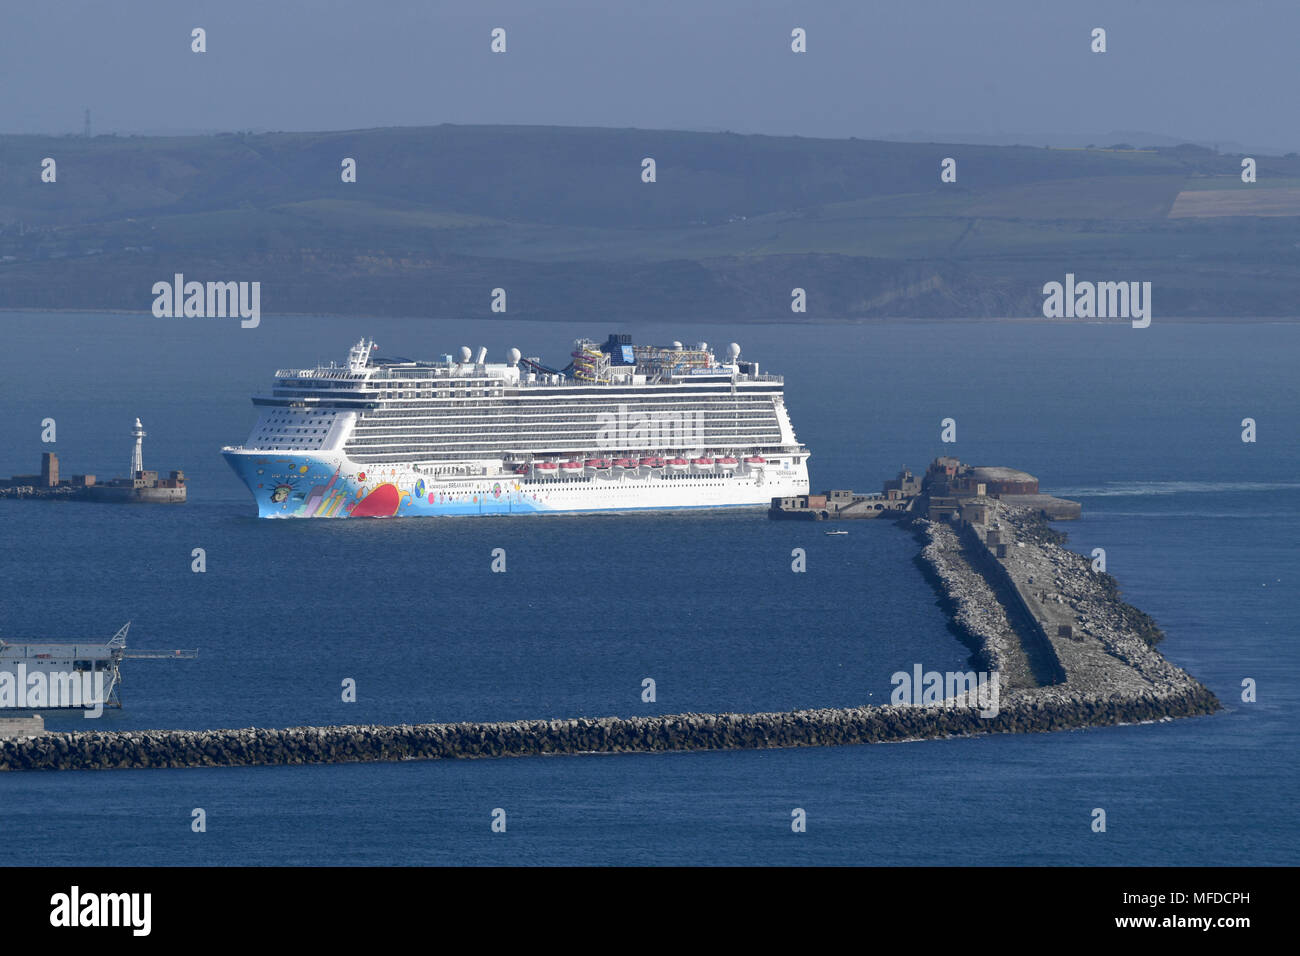 Norwegian Breakaway cruise ship enters Portland Port, at 145,655 GT, it is the longest and heaviest vessel to ever dock at Portland Port. Credit: Finnbarr Webster/Alamy Live News Stock Photo